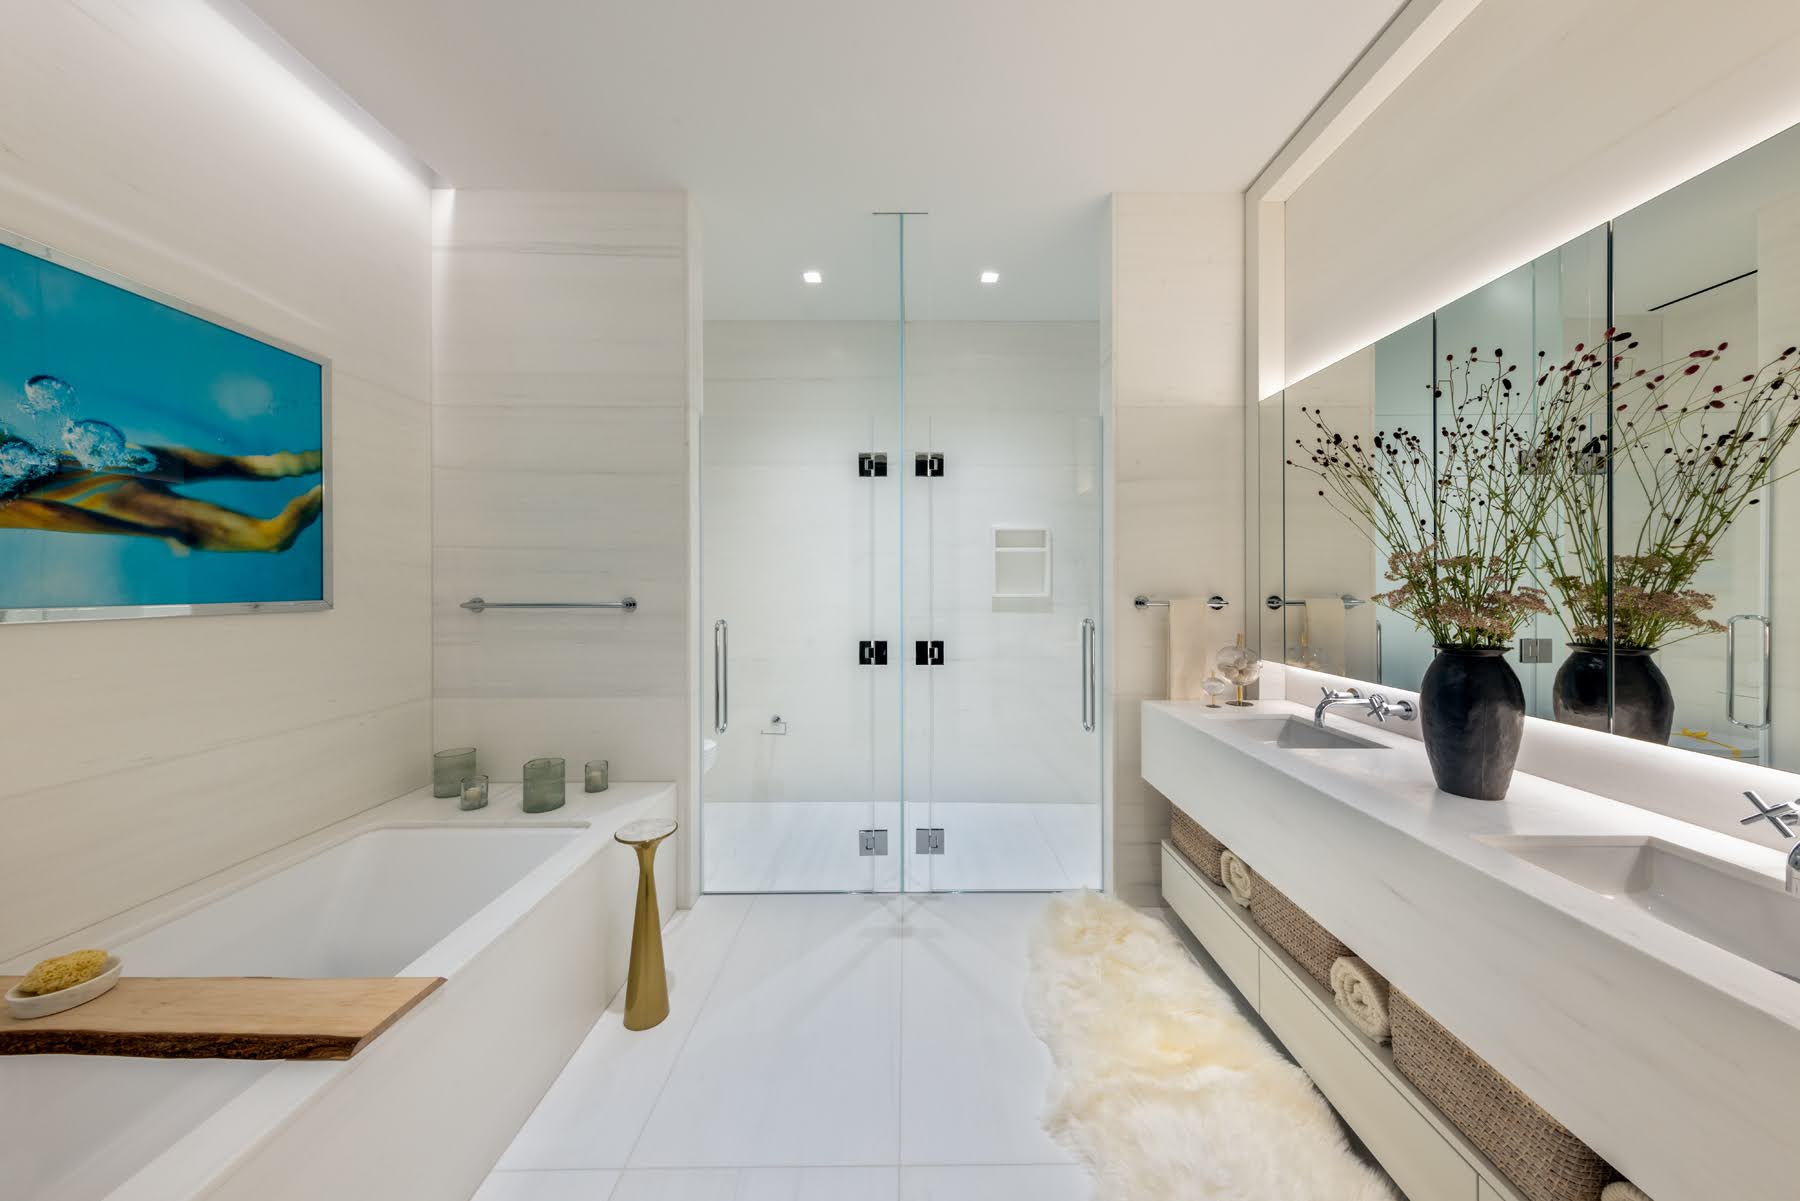 Model bathroom at One Wall Street, staged by Yellow House - Photo credit Evan Joseph for Macklowe Properties